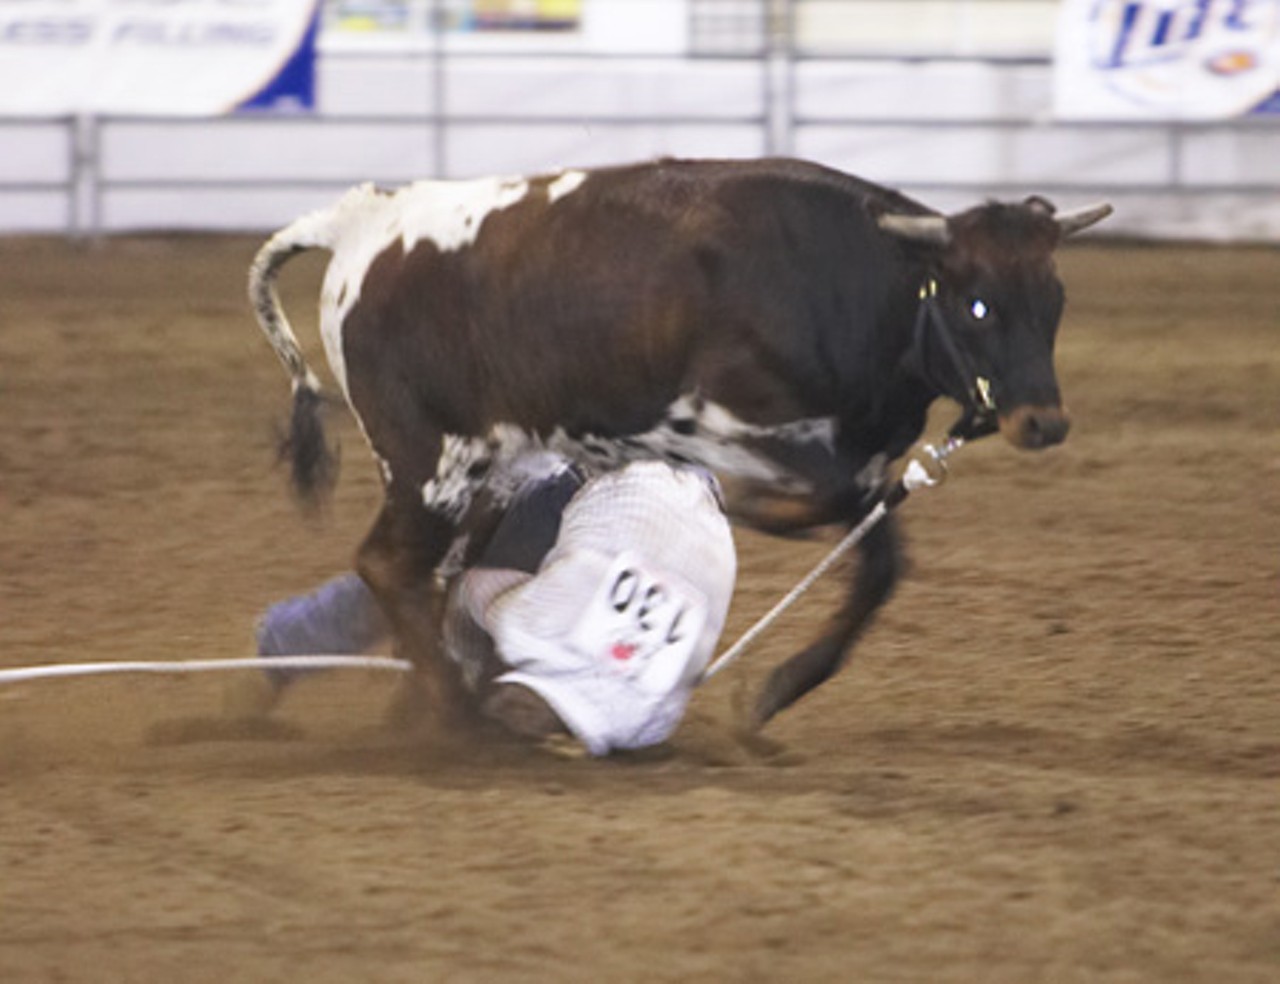 Because, sometimes the steer mounts you.